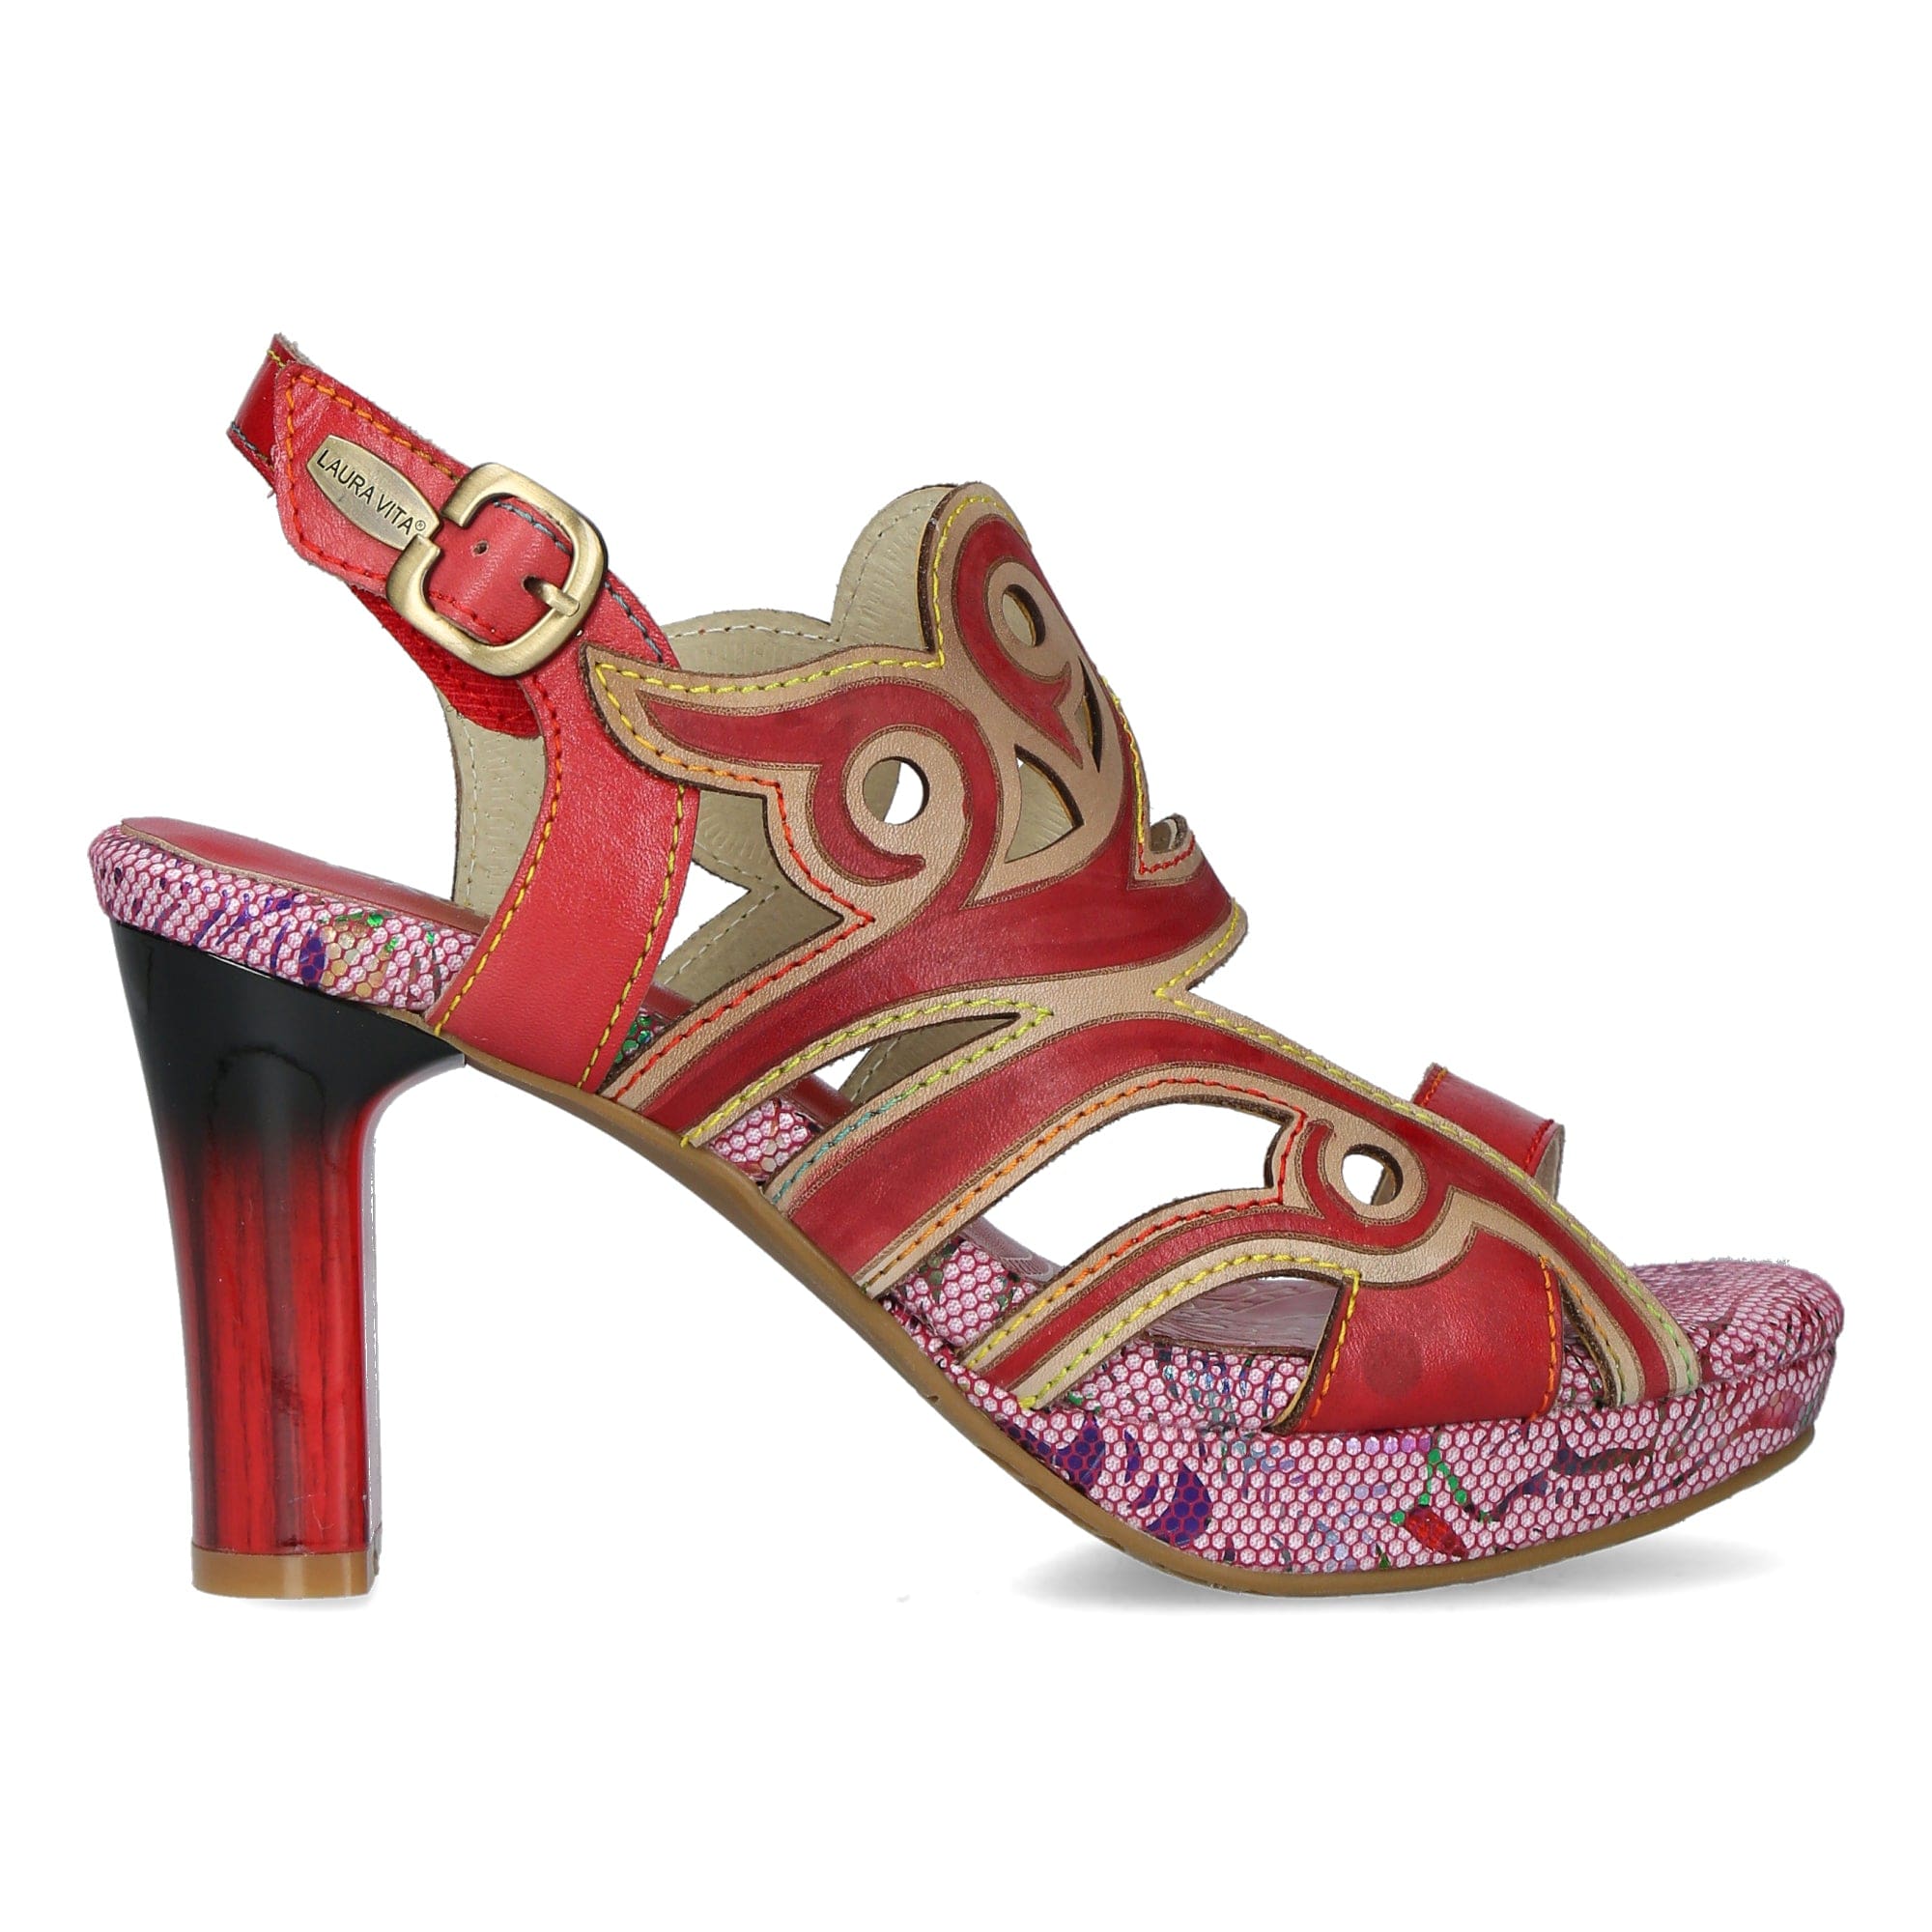 Shoe HICAO 16 - 35 / Red - Sandal